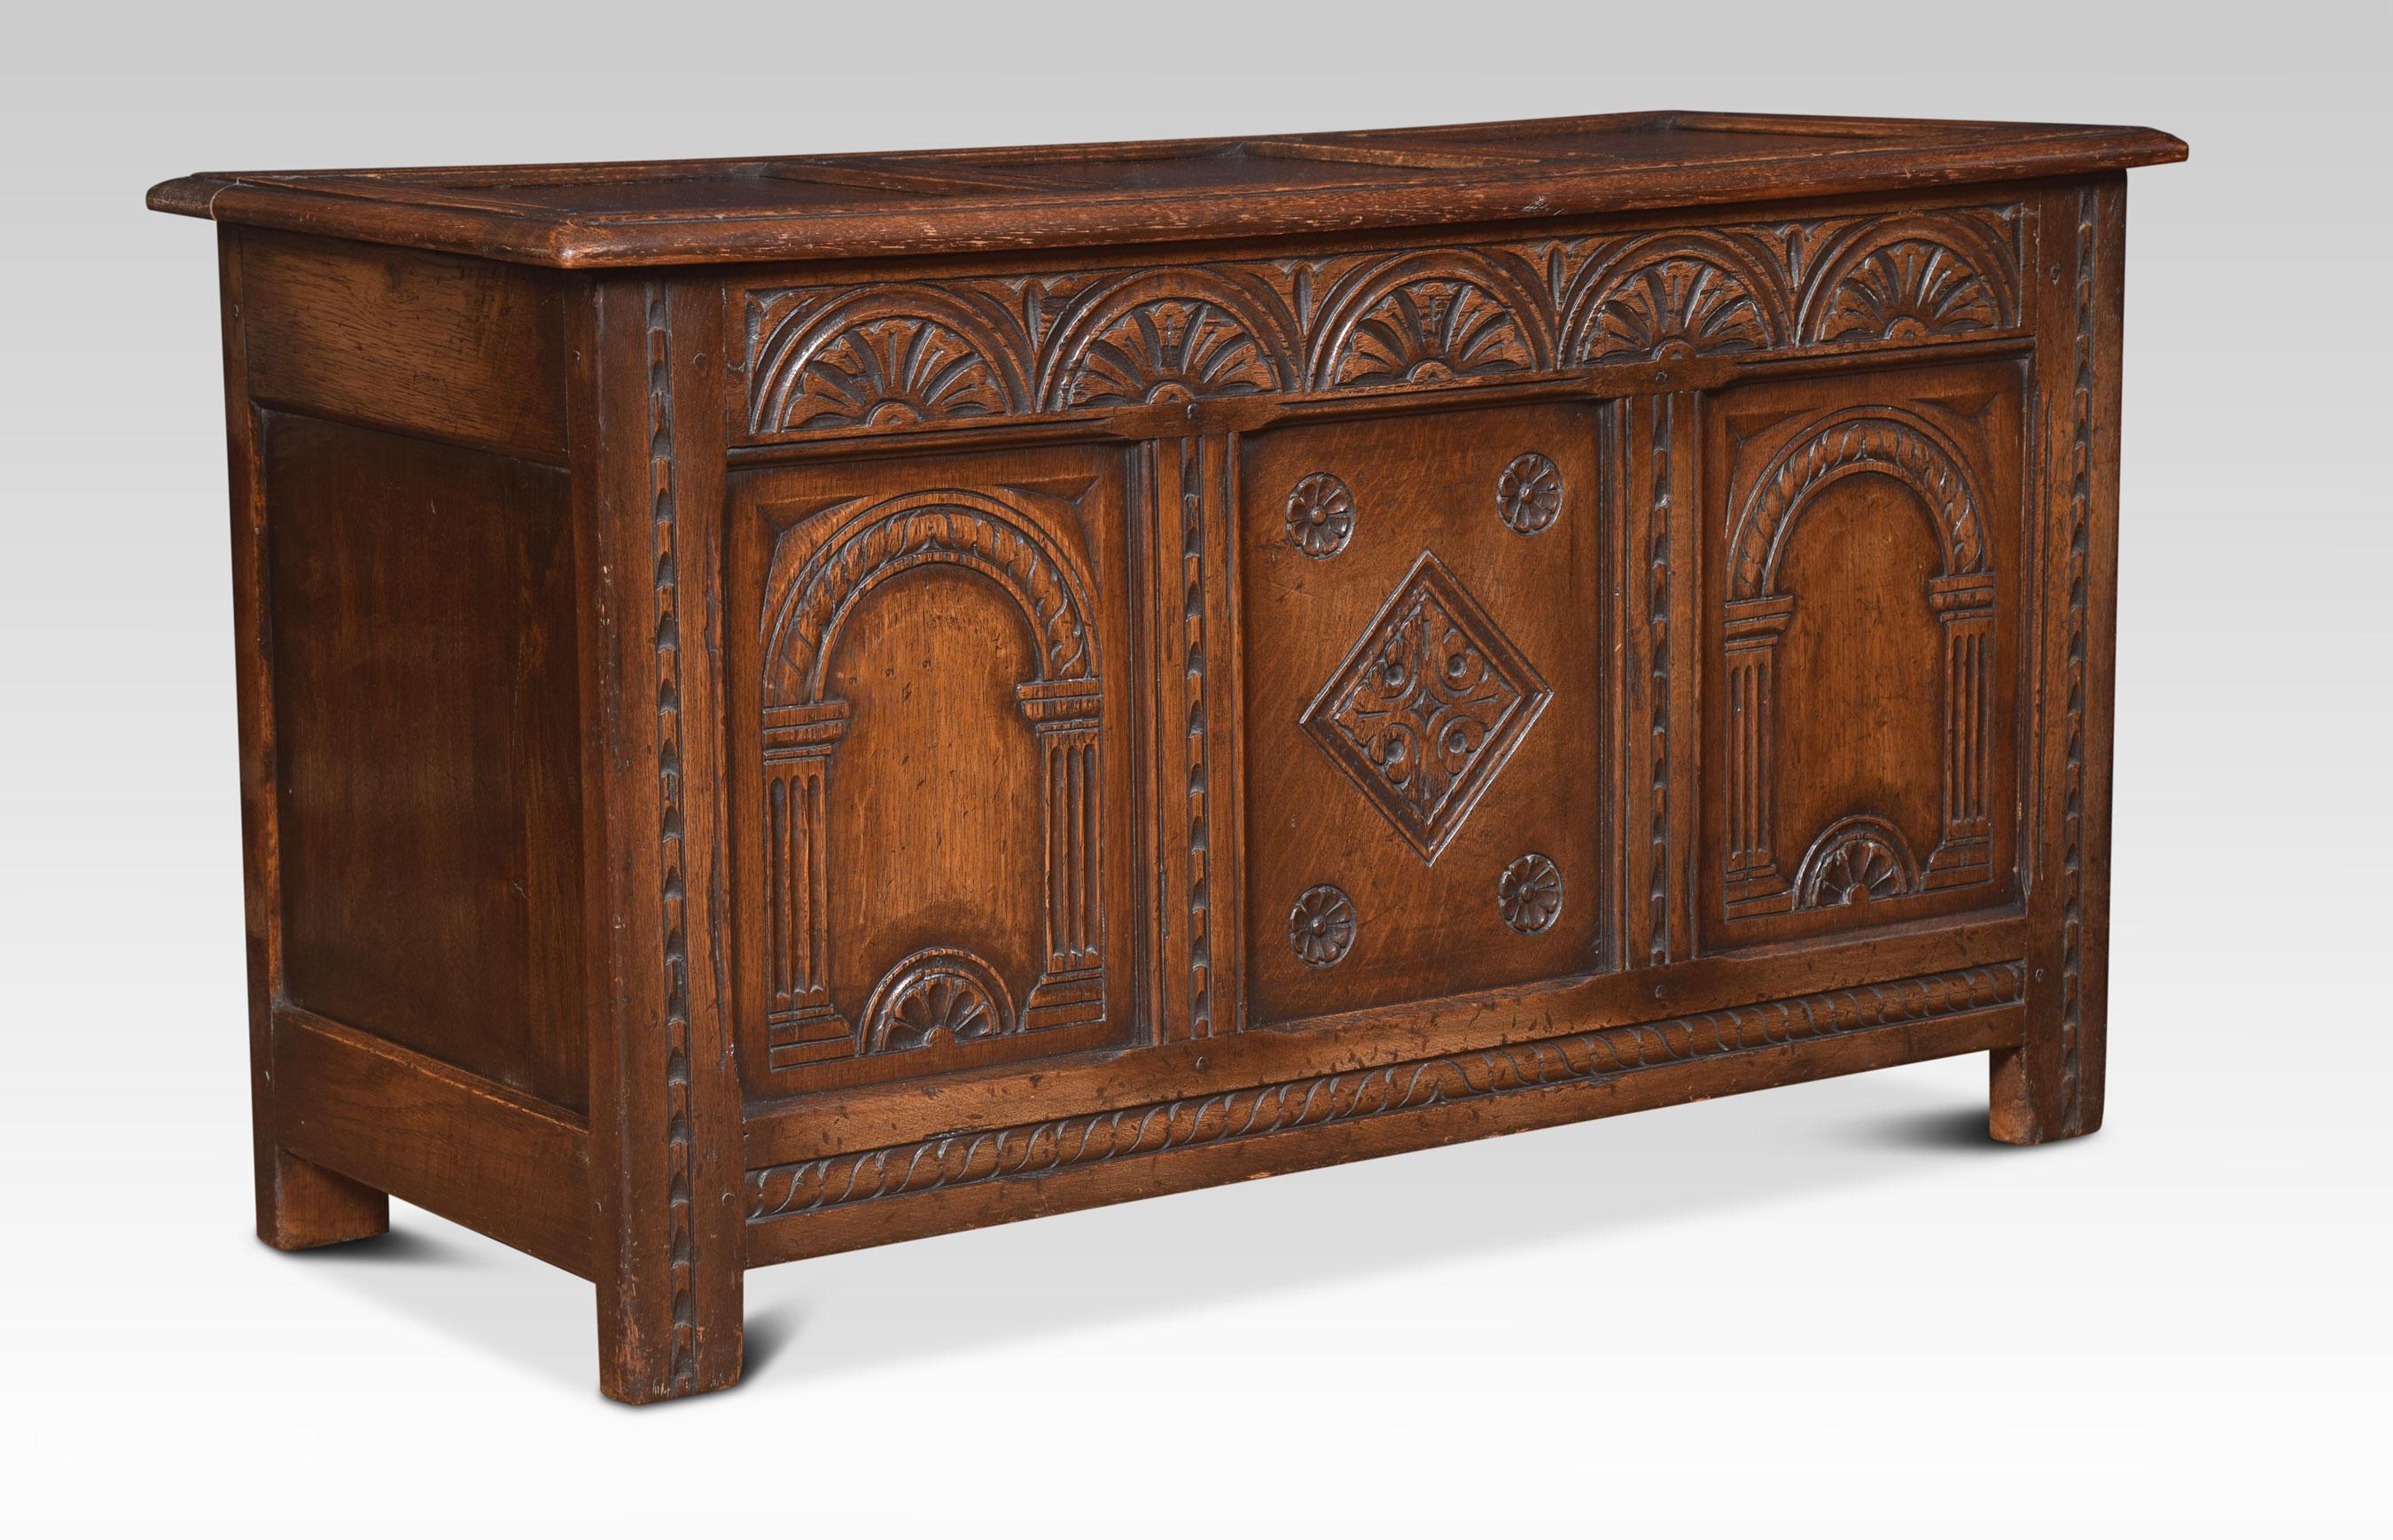 Oak coffer or blanket chest, the large rectangular hinged lid opening to reveal Lage storage facility. Above an arcaded frieze and three carved panels. All raised up on stile feet.
Dimensions
Height 23 inches
Width 41.5 inches
Depth 17.5 inches.